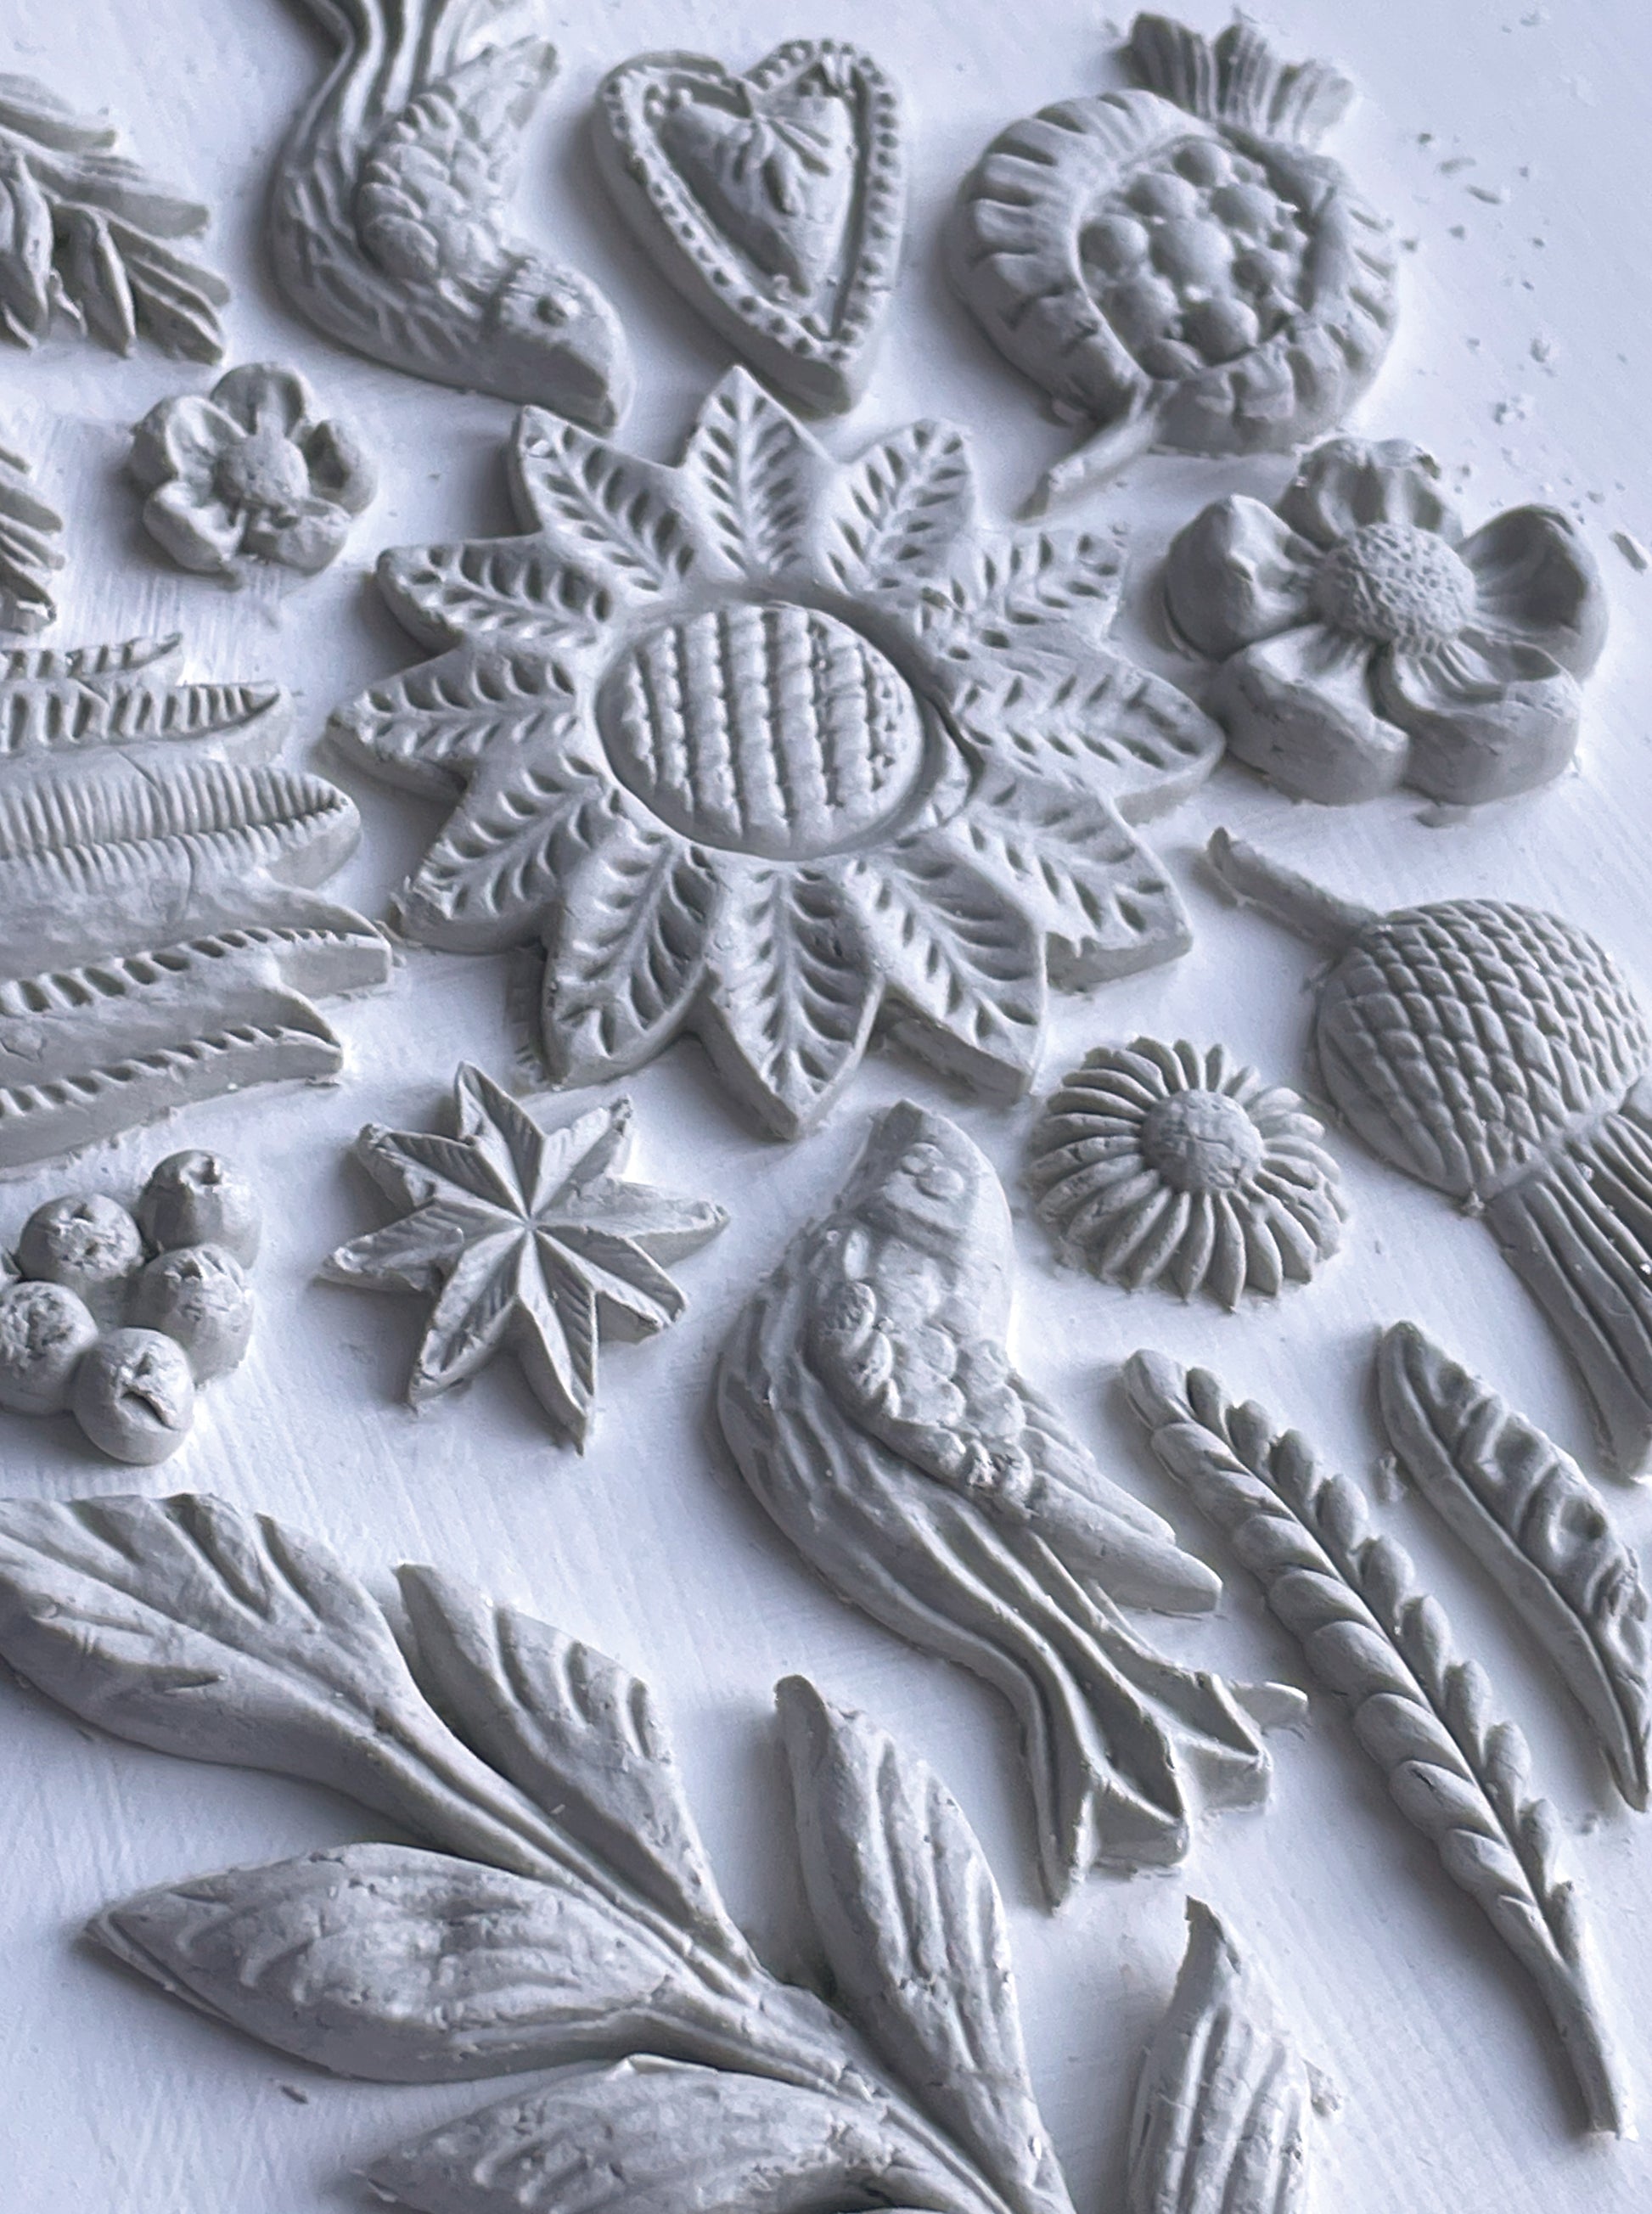 Iron Orchid Designs Primitive folk art grey Mould castings made out of white clay